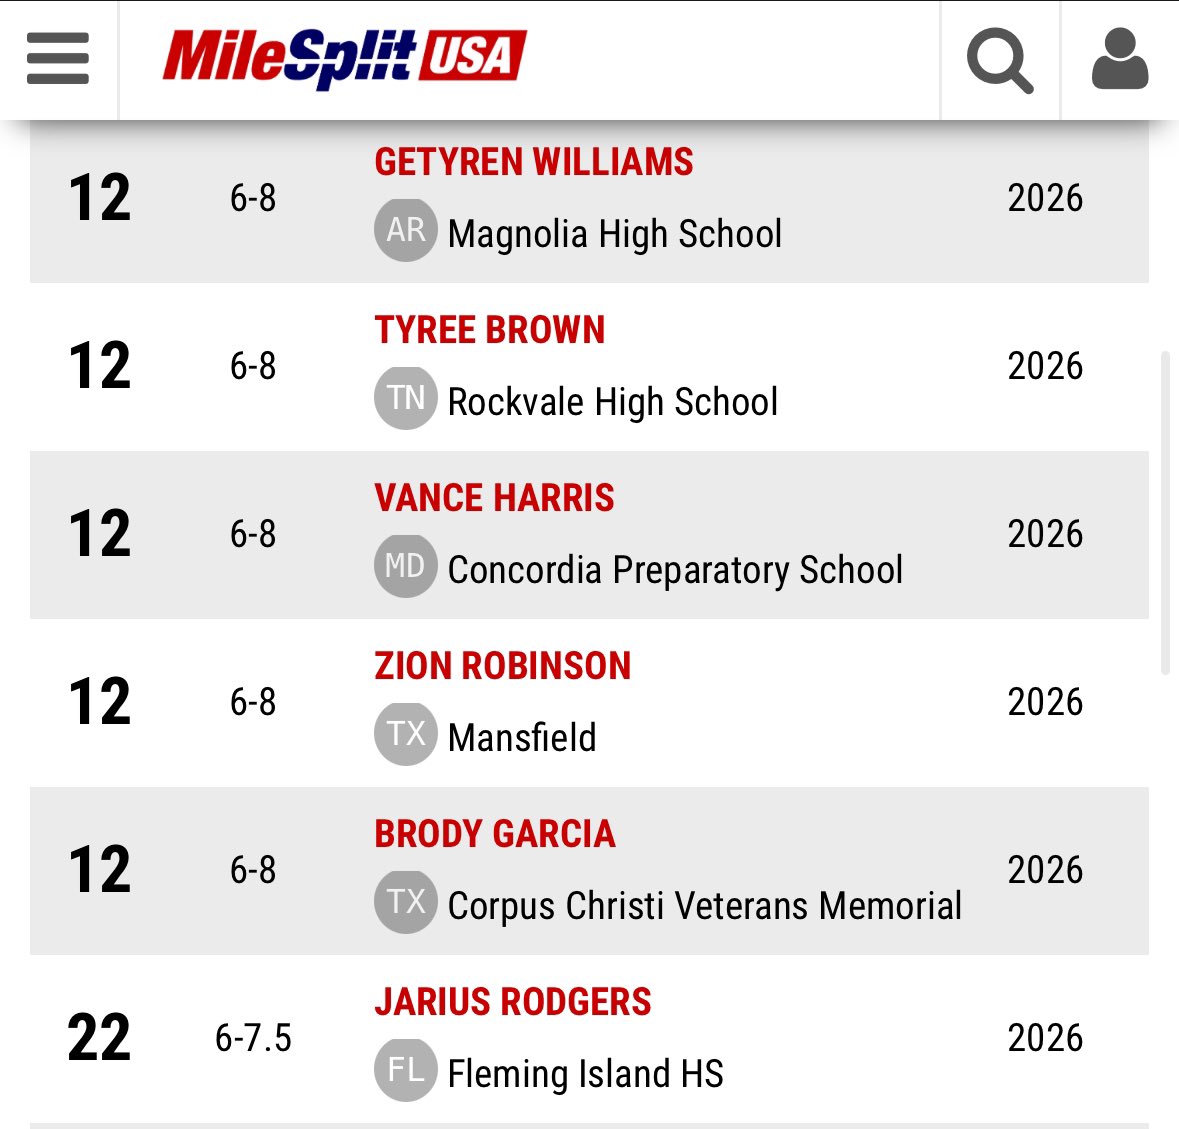 Three total in National Top 20 for the Class of 2026.